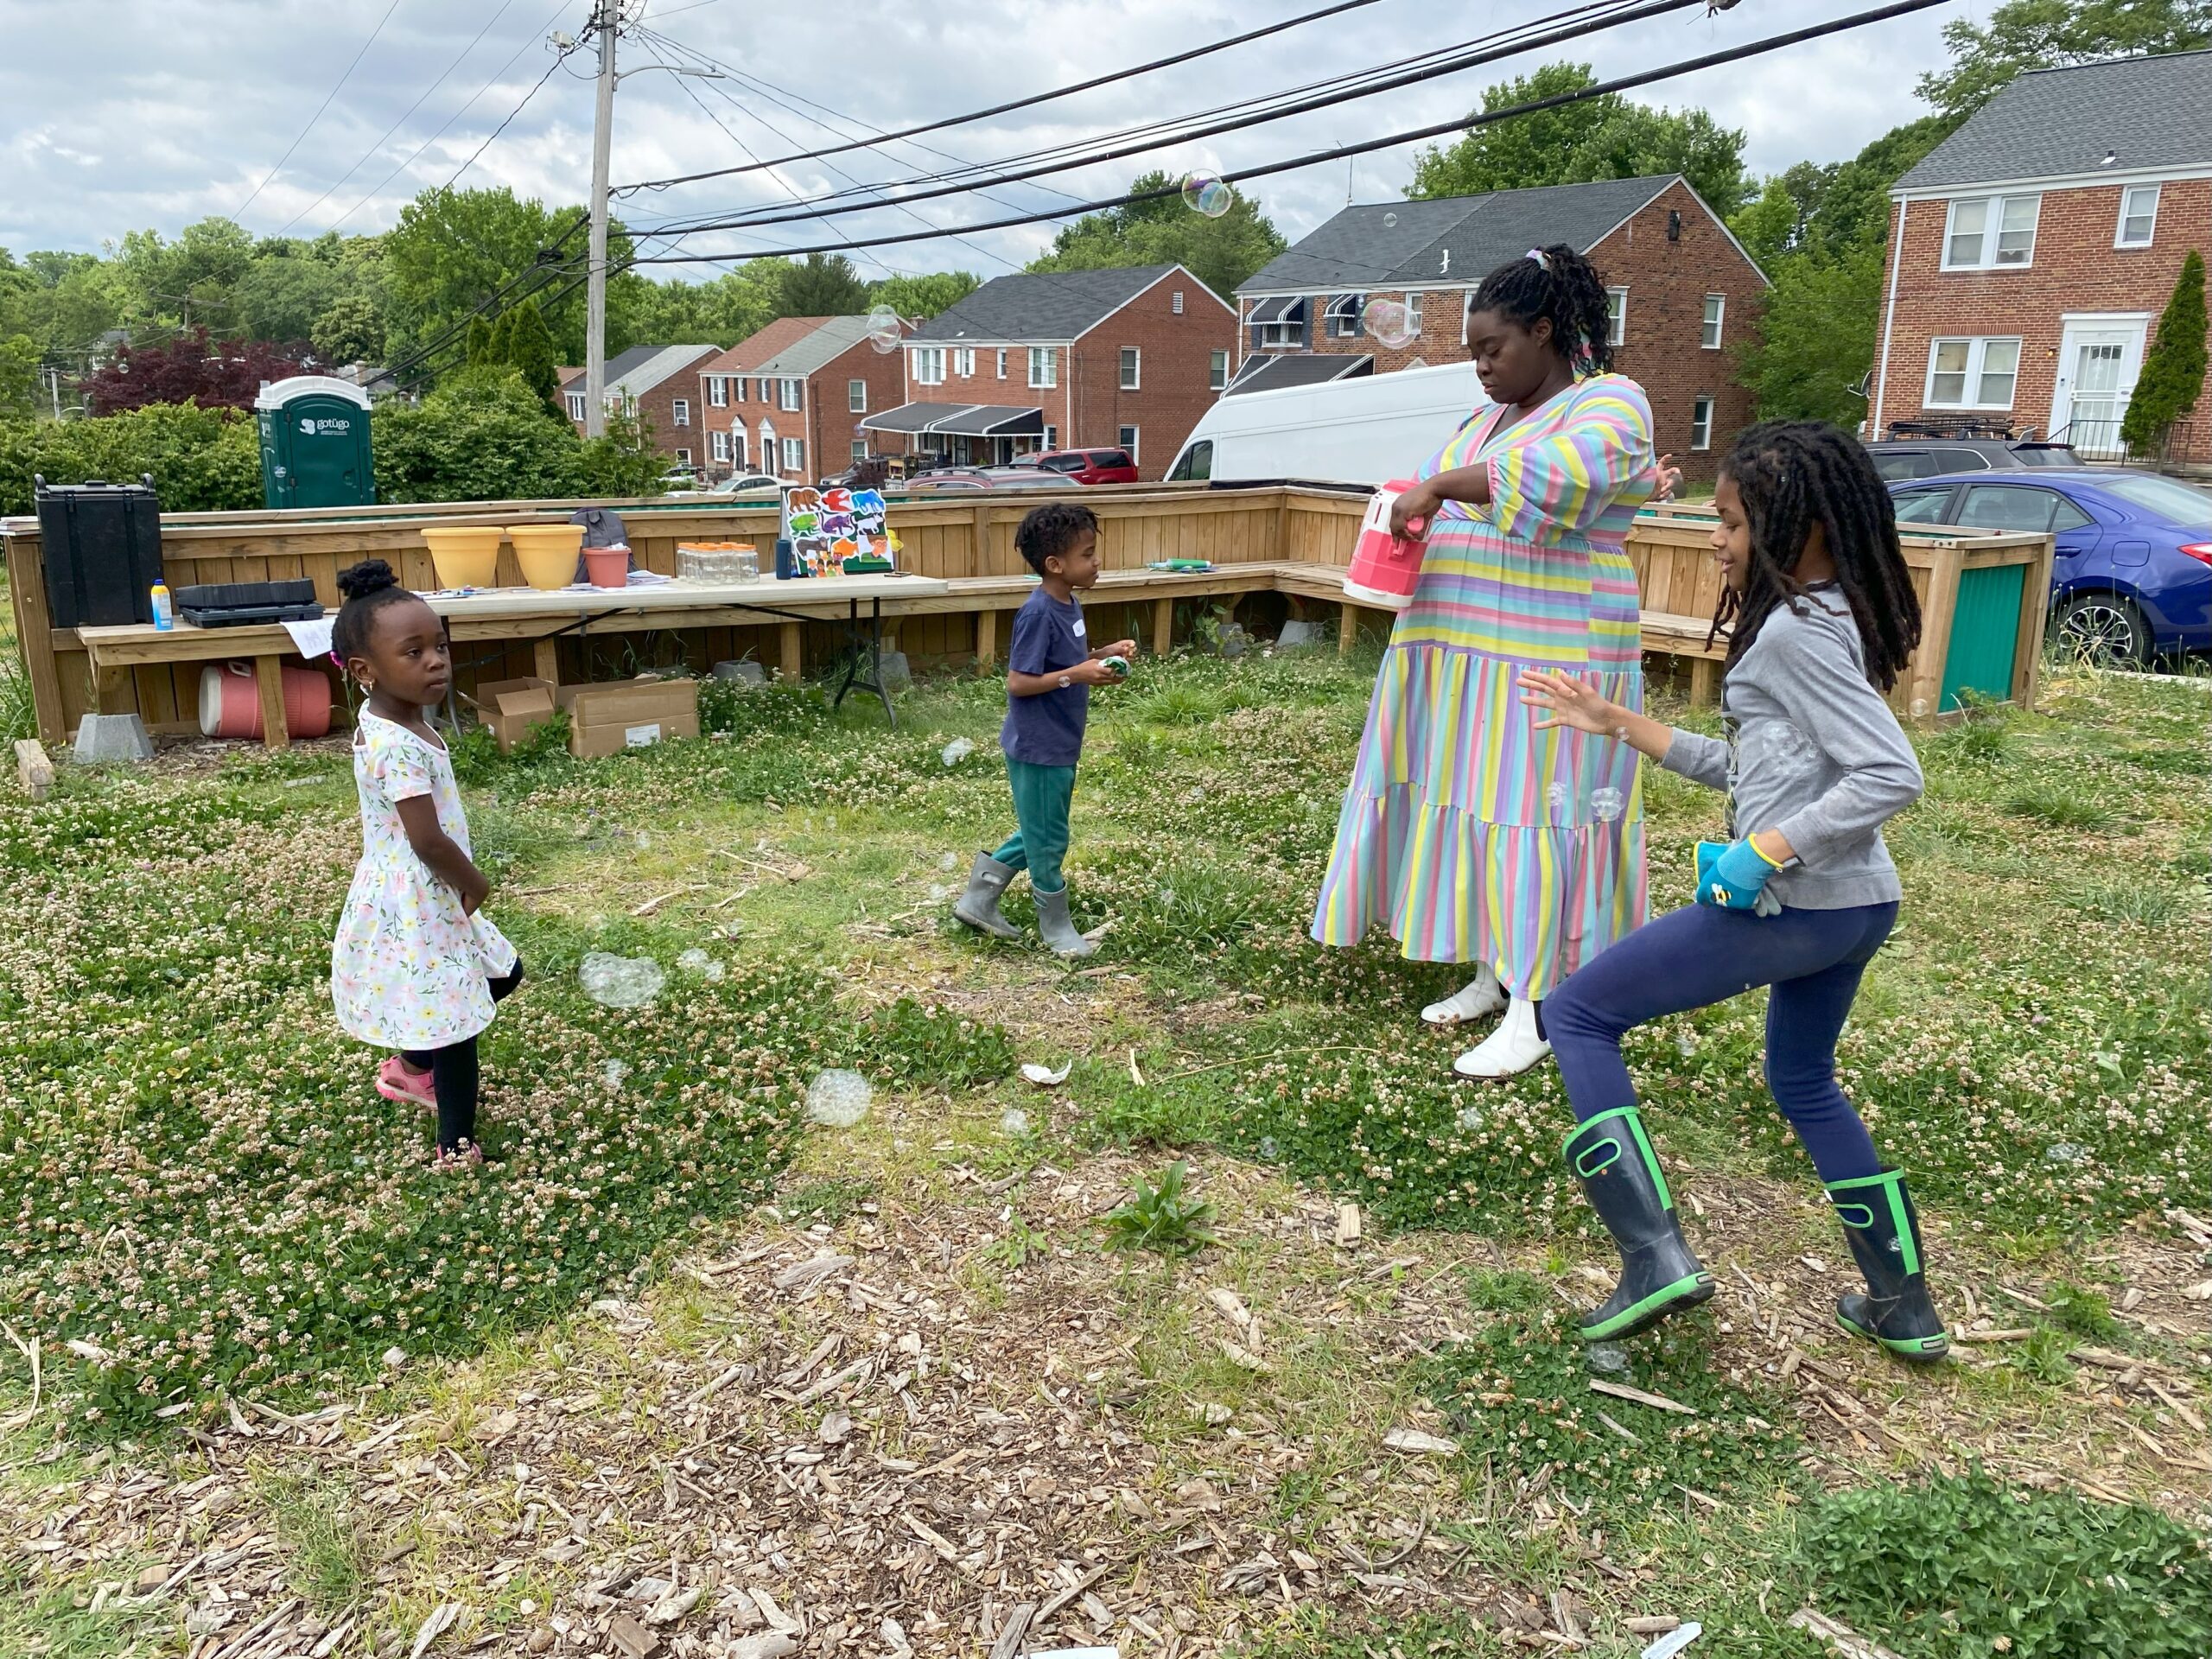 An adult and three children are outside playing with a bubble machine.